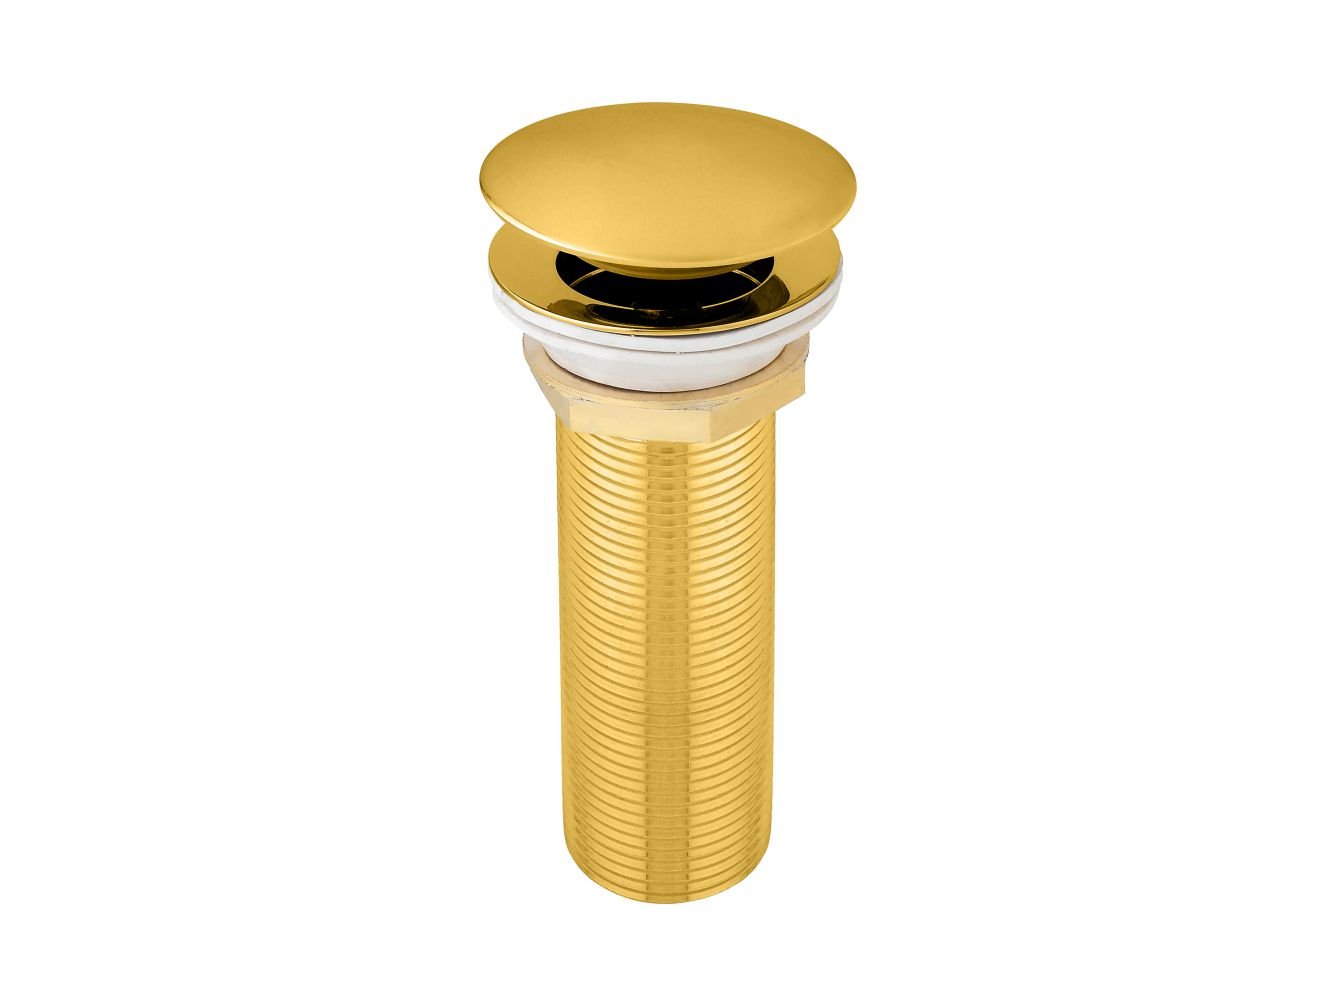 Pop-up 5(Inch) 285GM Full thread Waste Coupling (Gold Finish)